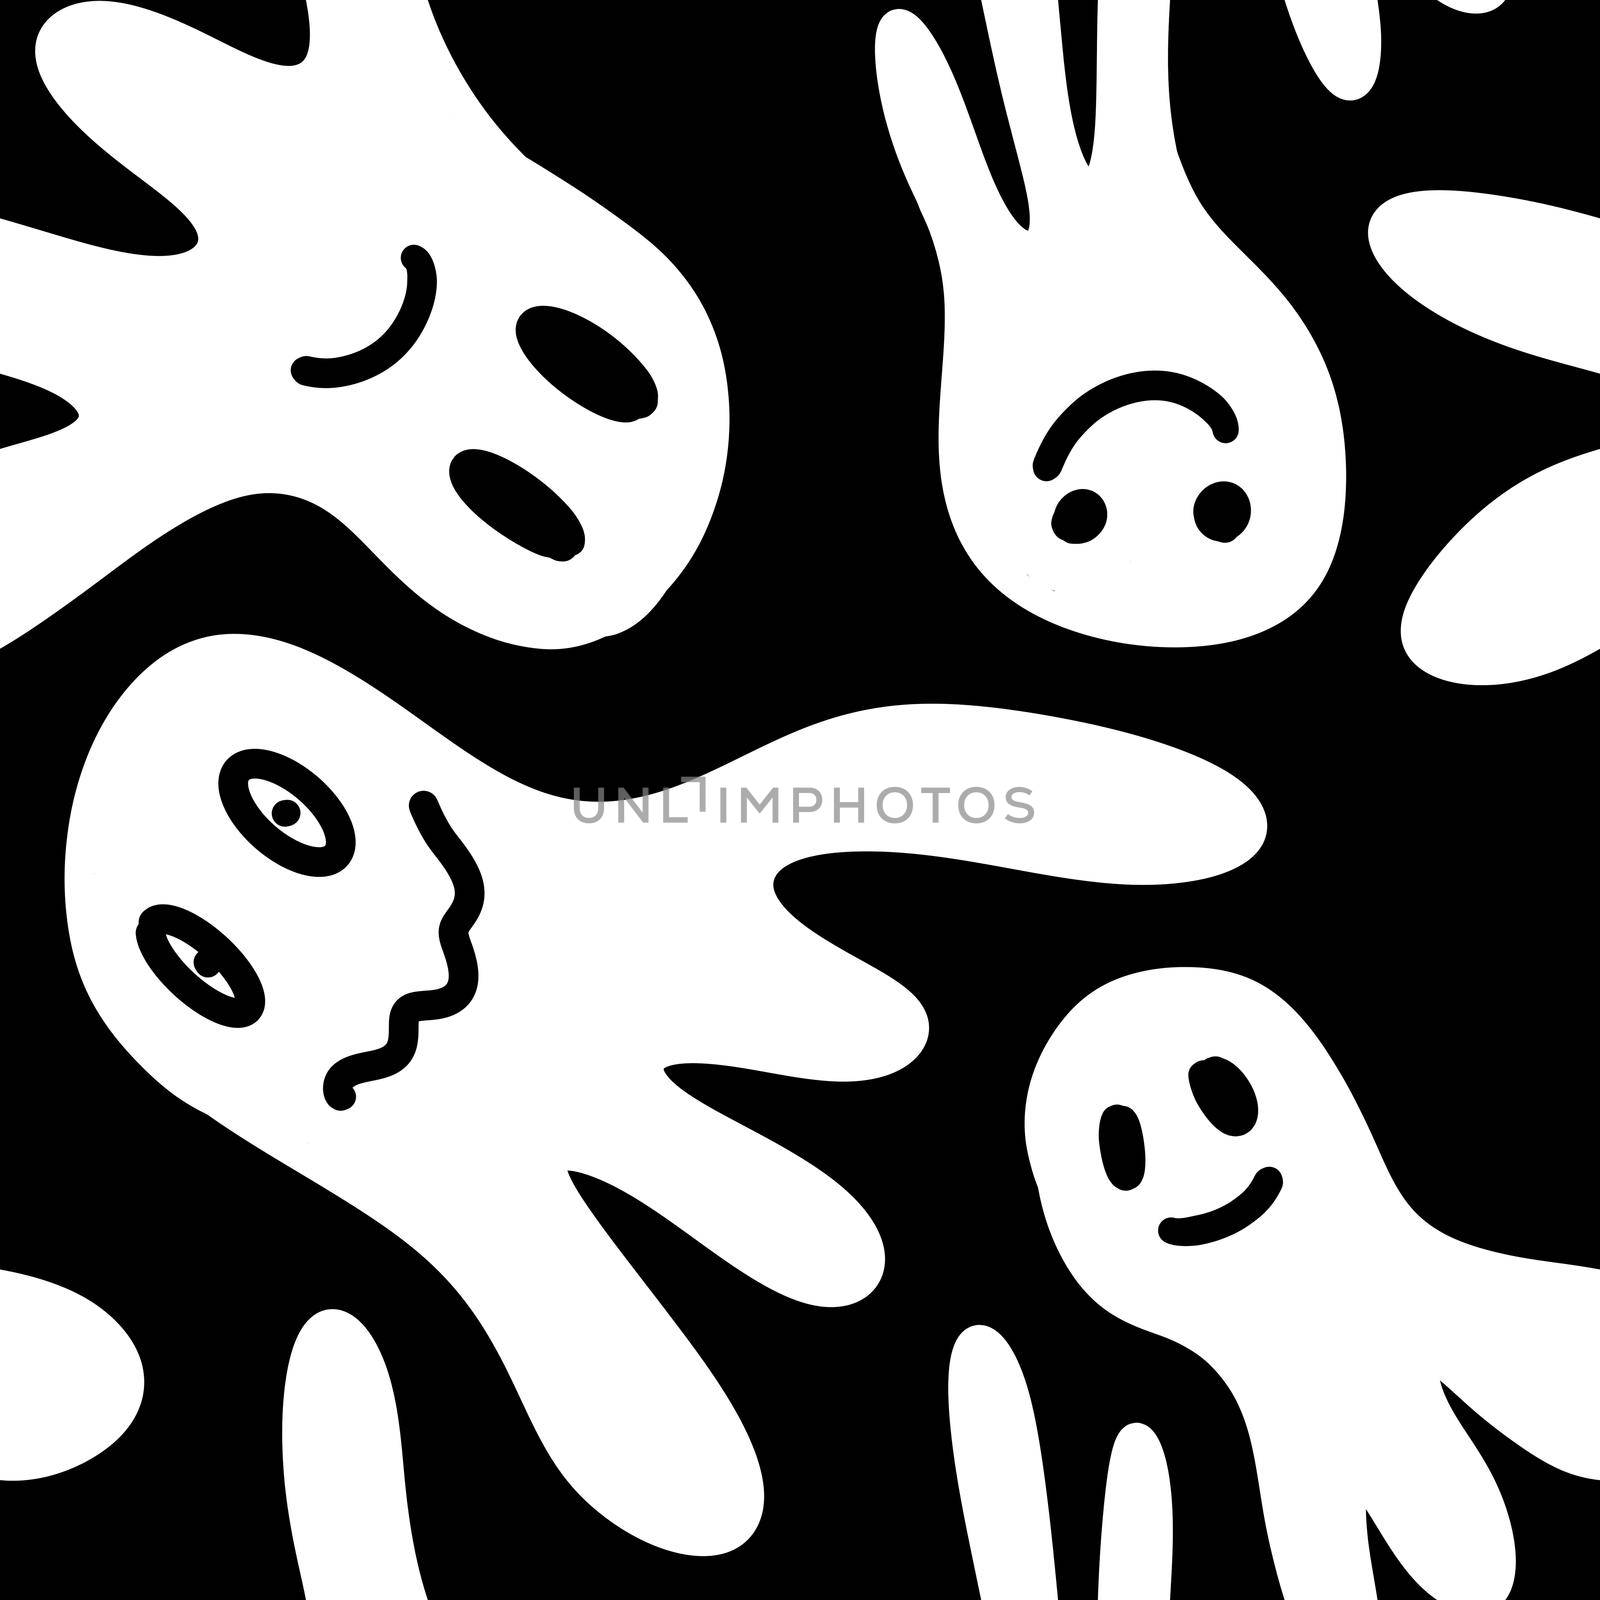 Seamless hand drawn black and white Halloween pattern with cartoon ghost skull bones pumpkin bat. Cute minimalist background for kids party invitation tesxtile wrapping paper. October nursery print